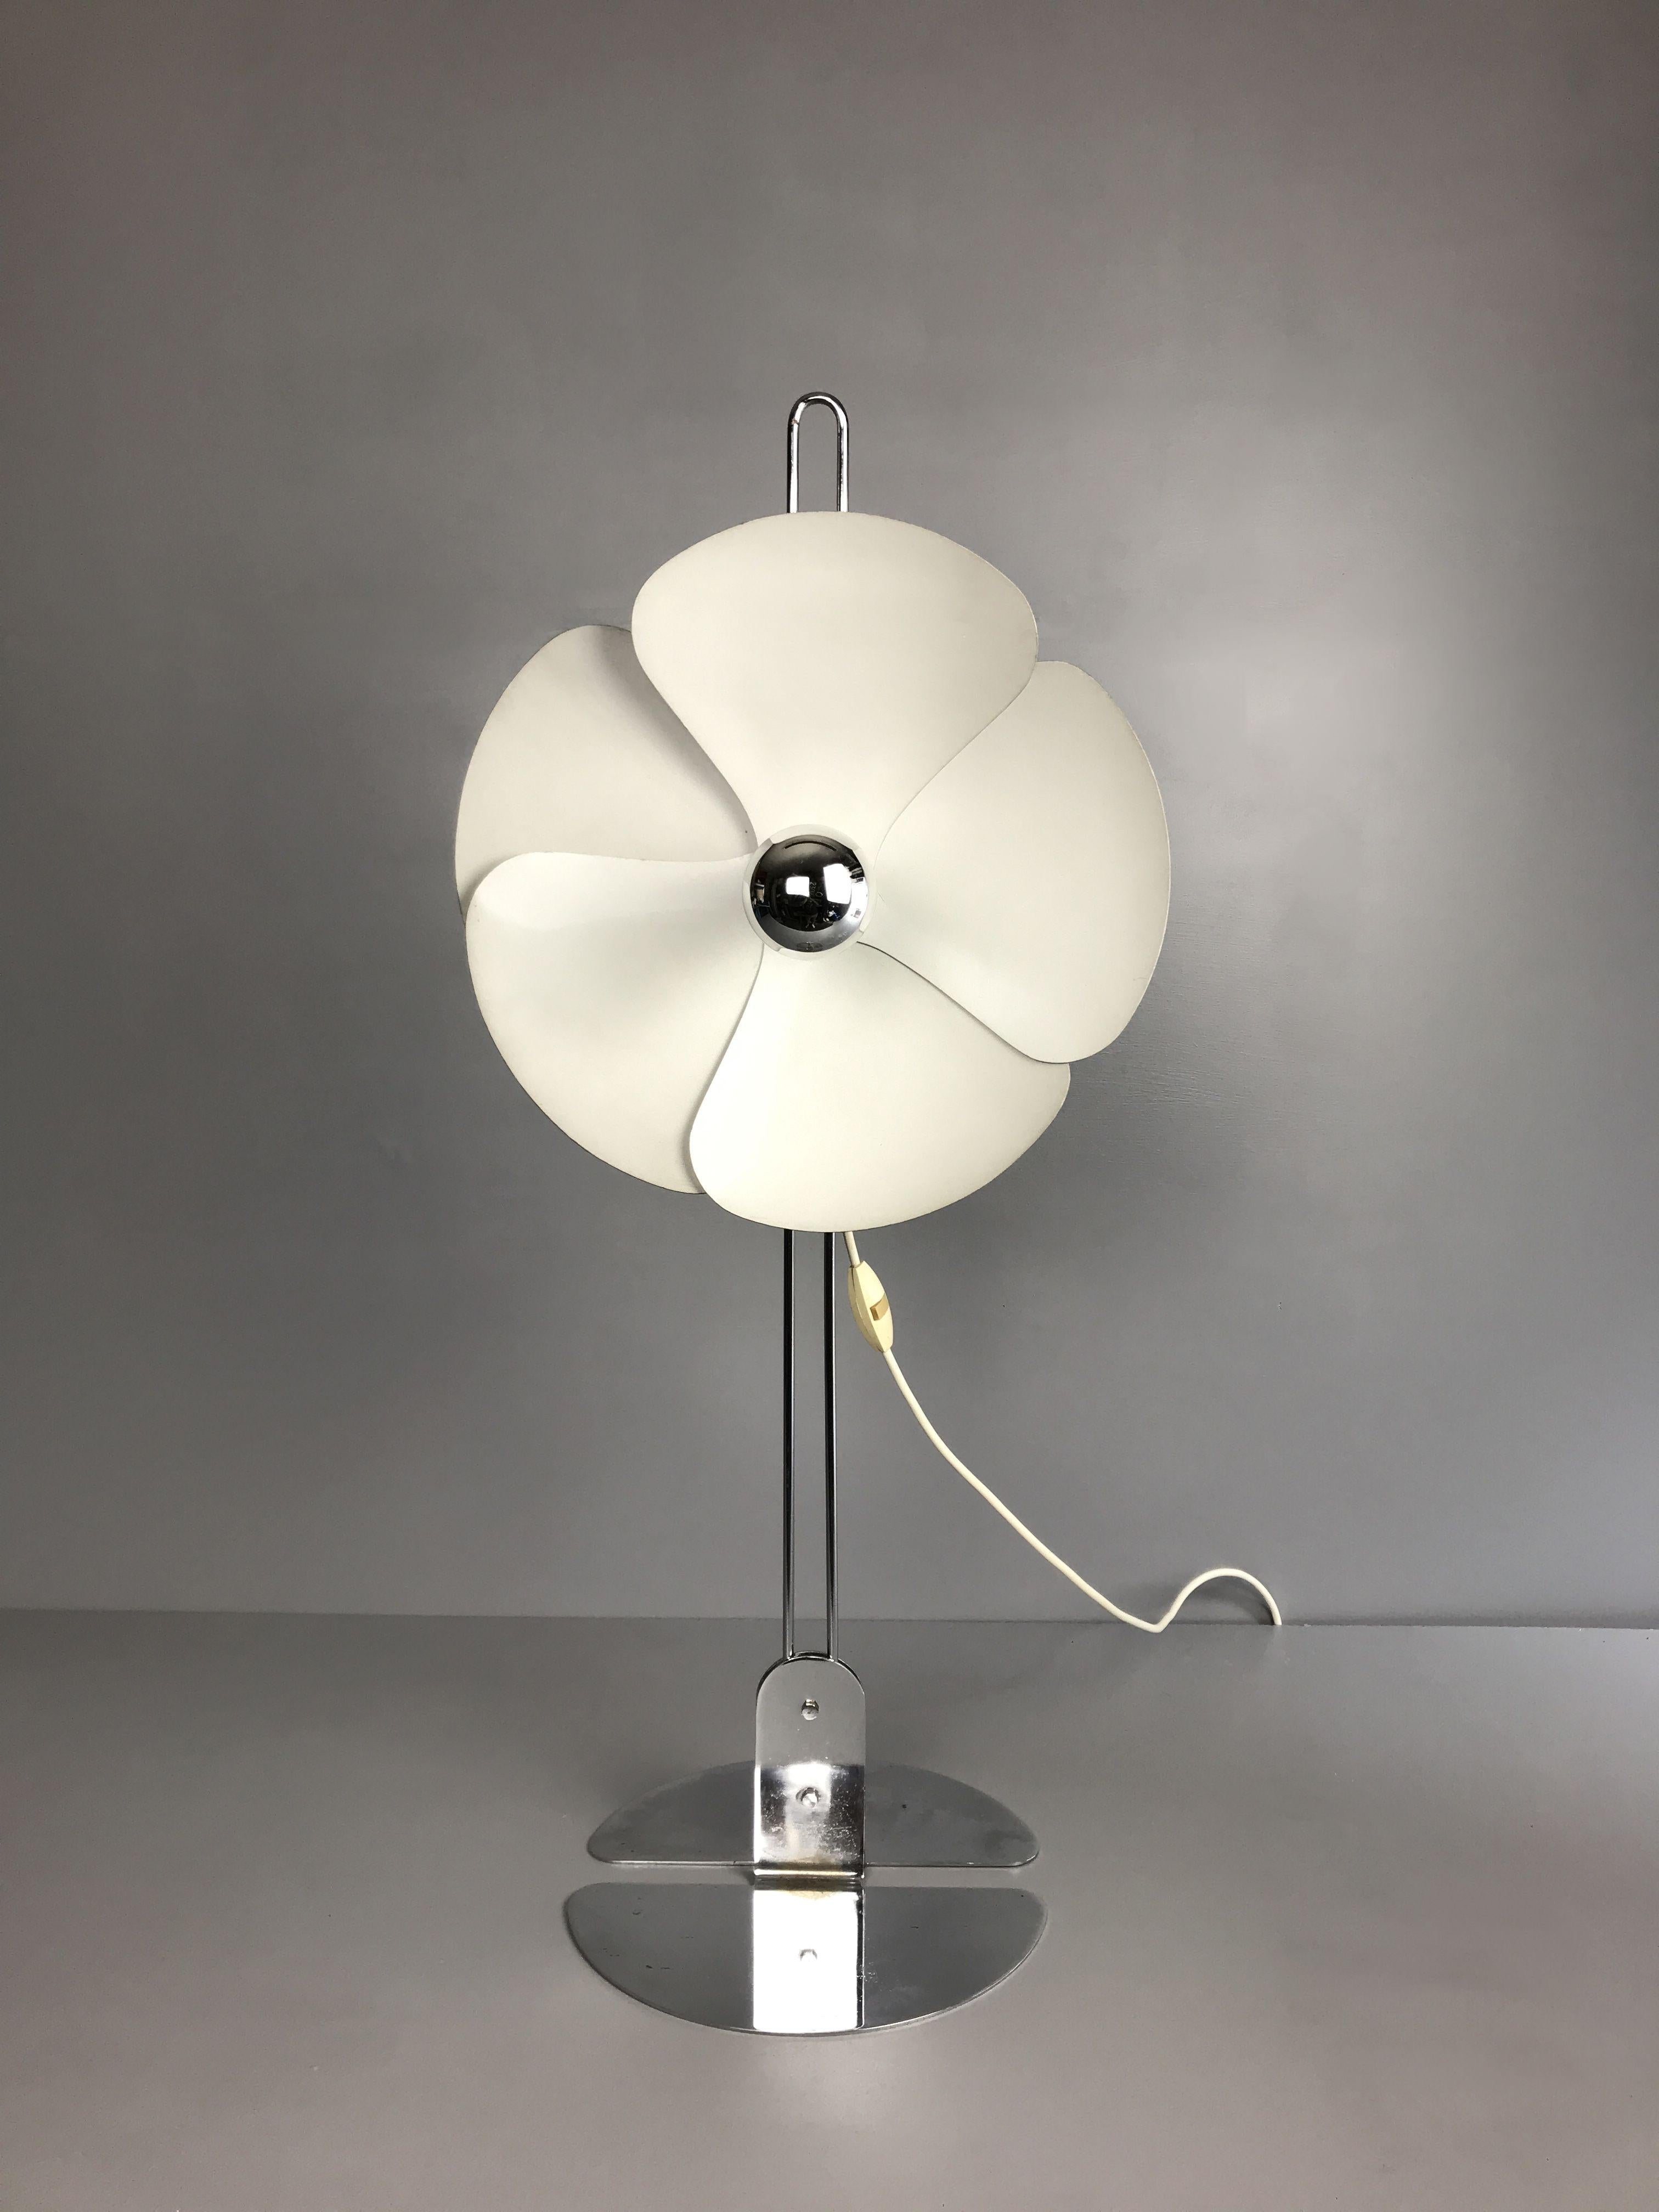 Model 2093 lamp by Olivier Mourgue initially manufactured by Disderot in 1967. In chromed metal and raw aluminum. Silver cap bulb provided. Light loose of chrome veneer on the base.
Pascal and Olivier Mourgue are two French brothers and designers.